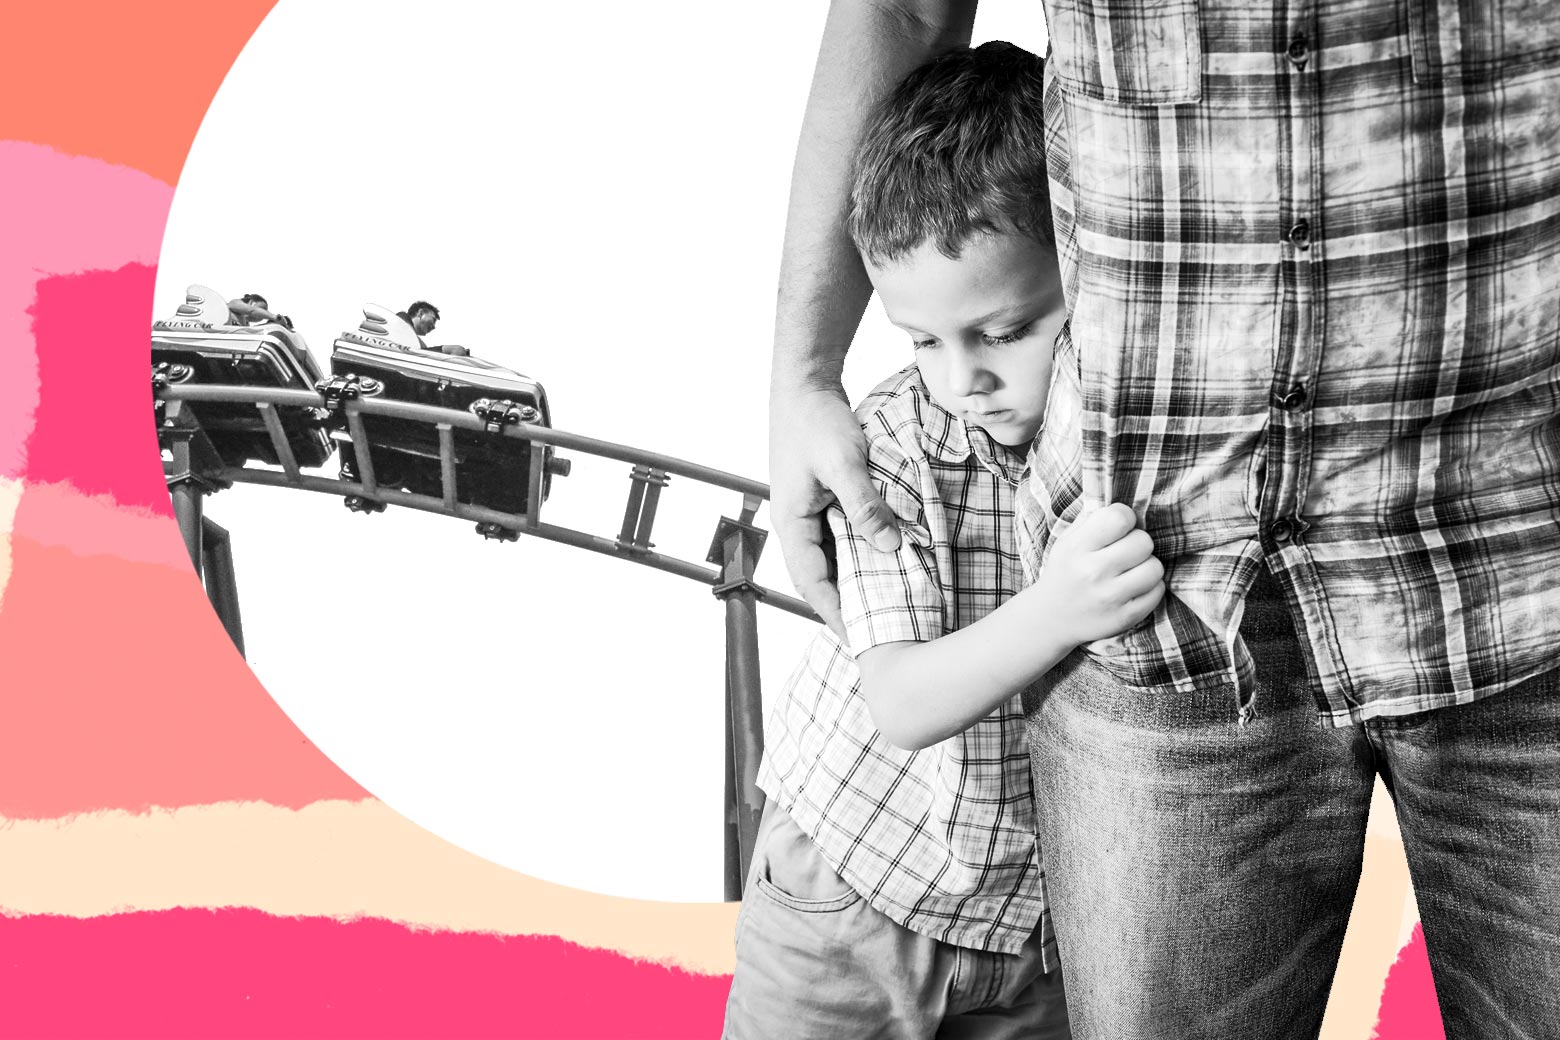 Photo illustration of a roller coaster behind a scared boy clinging to his father.